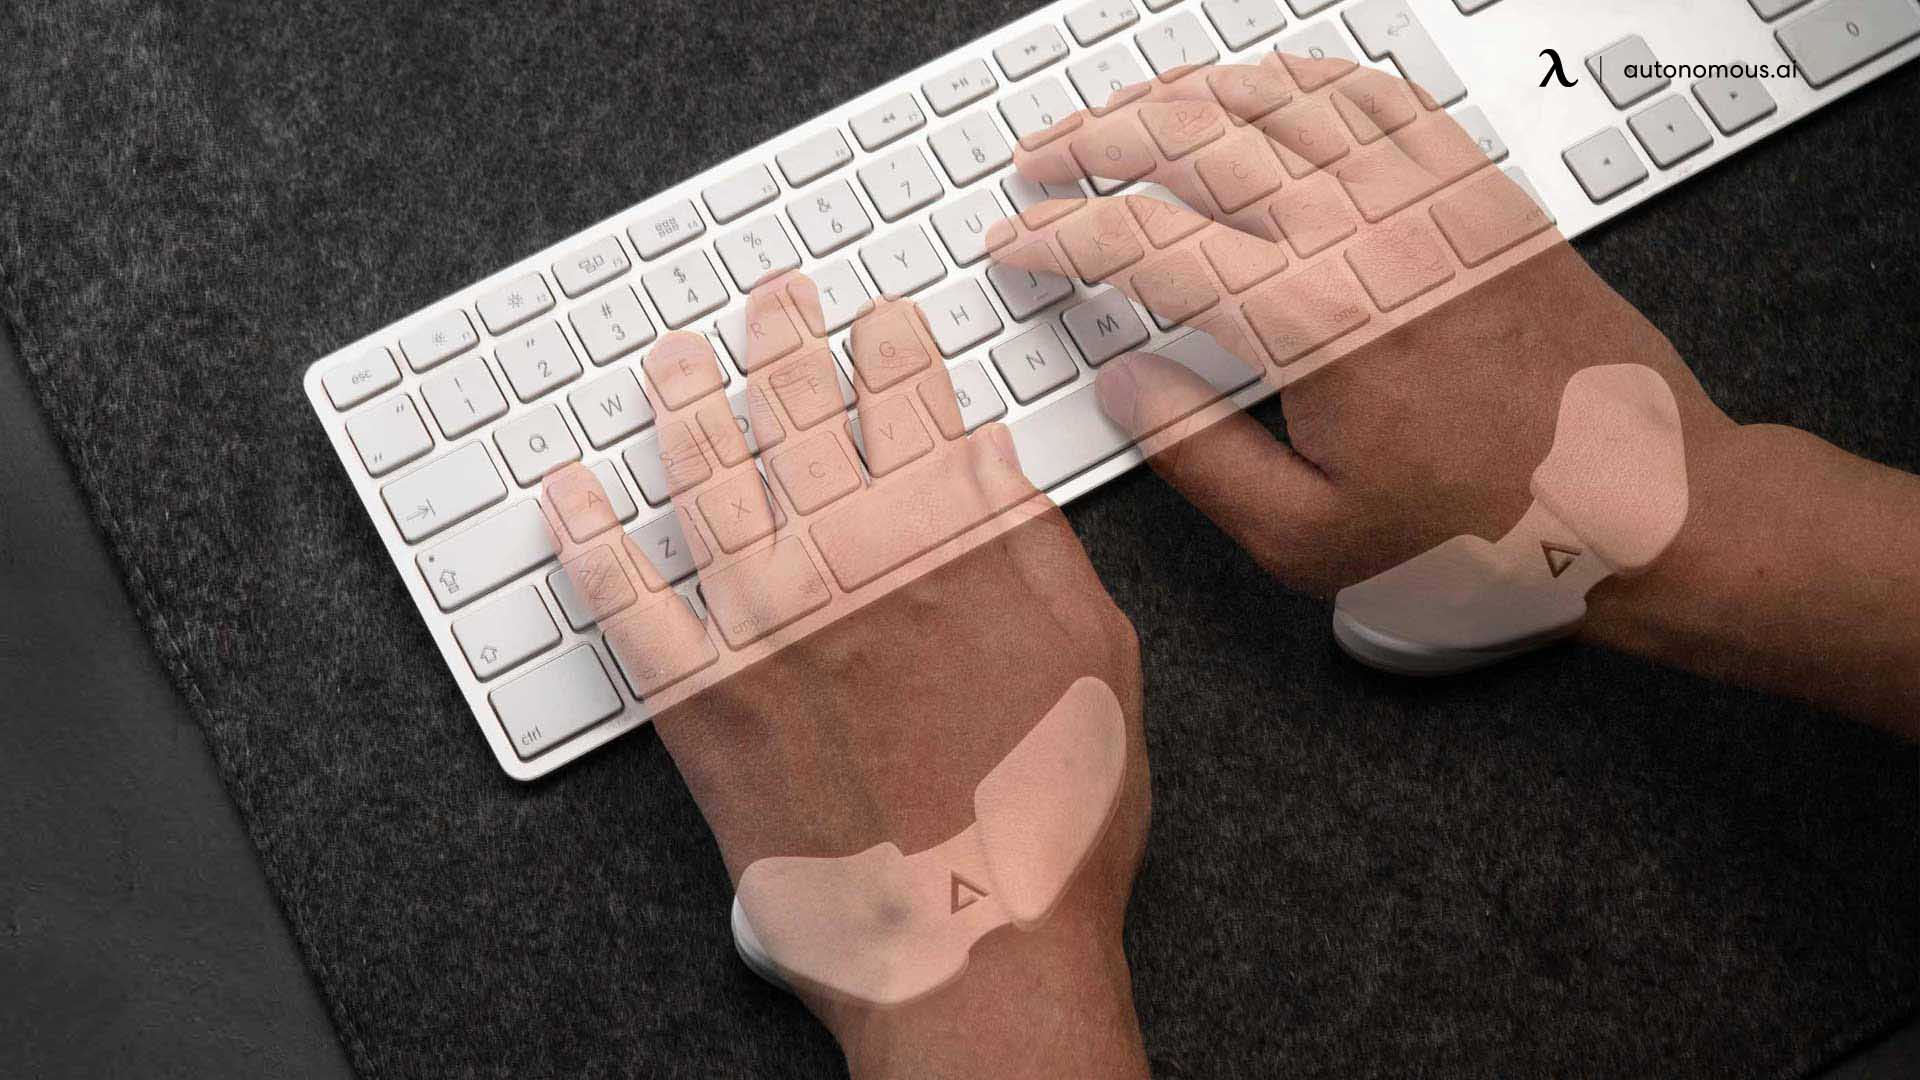 How to Use a Wrist Rest for Computer Mouse